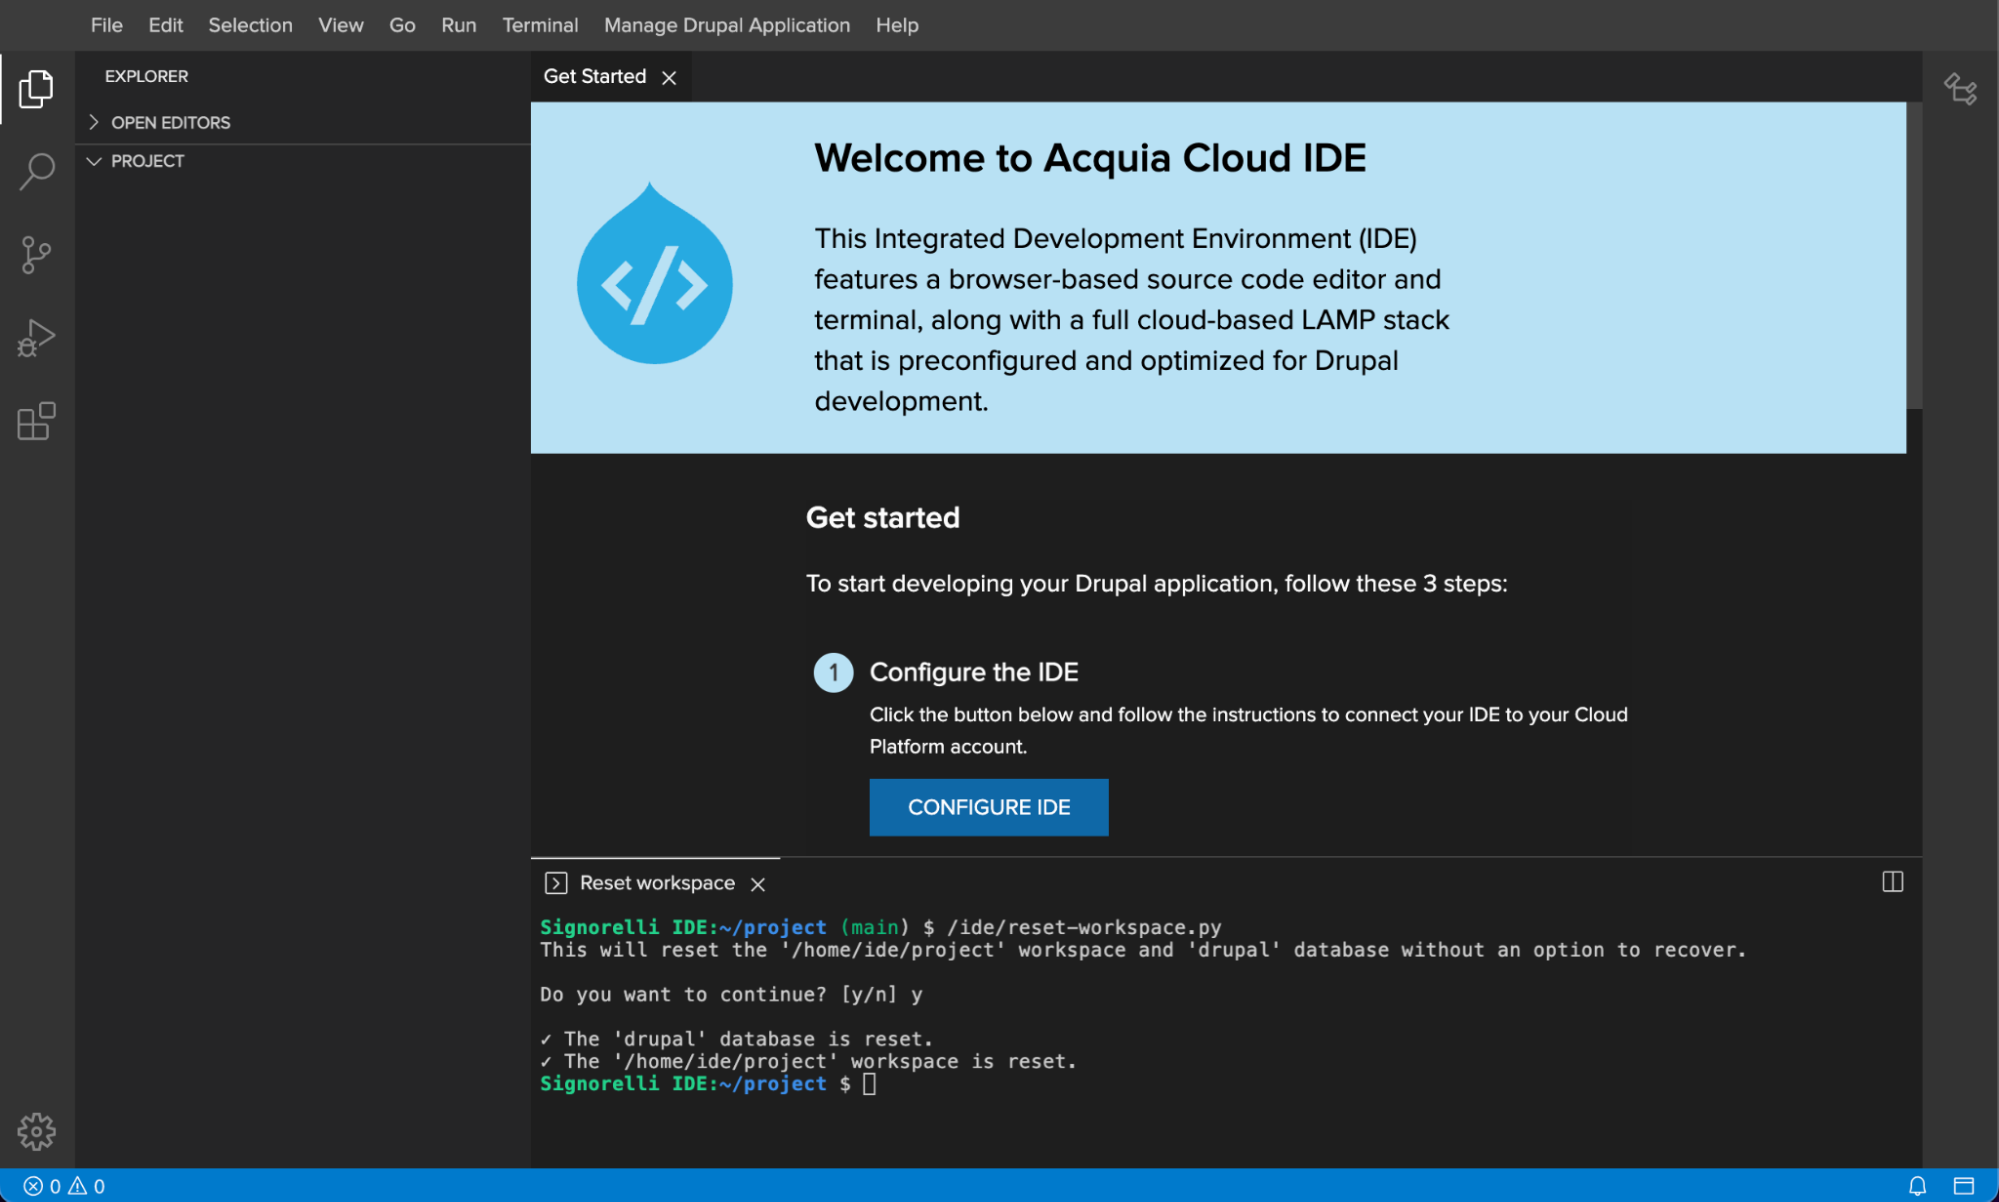 Fresh Acquia Cloud IDE Get started page.